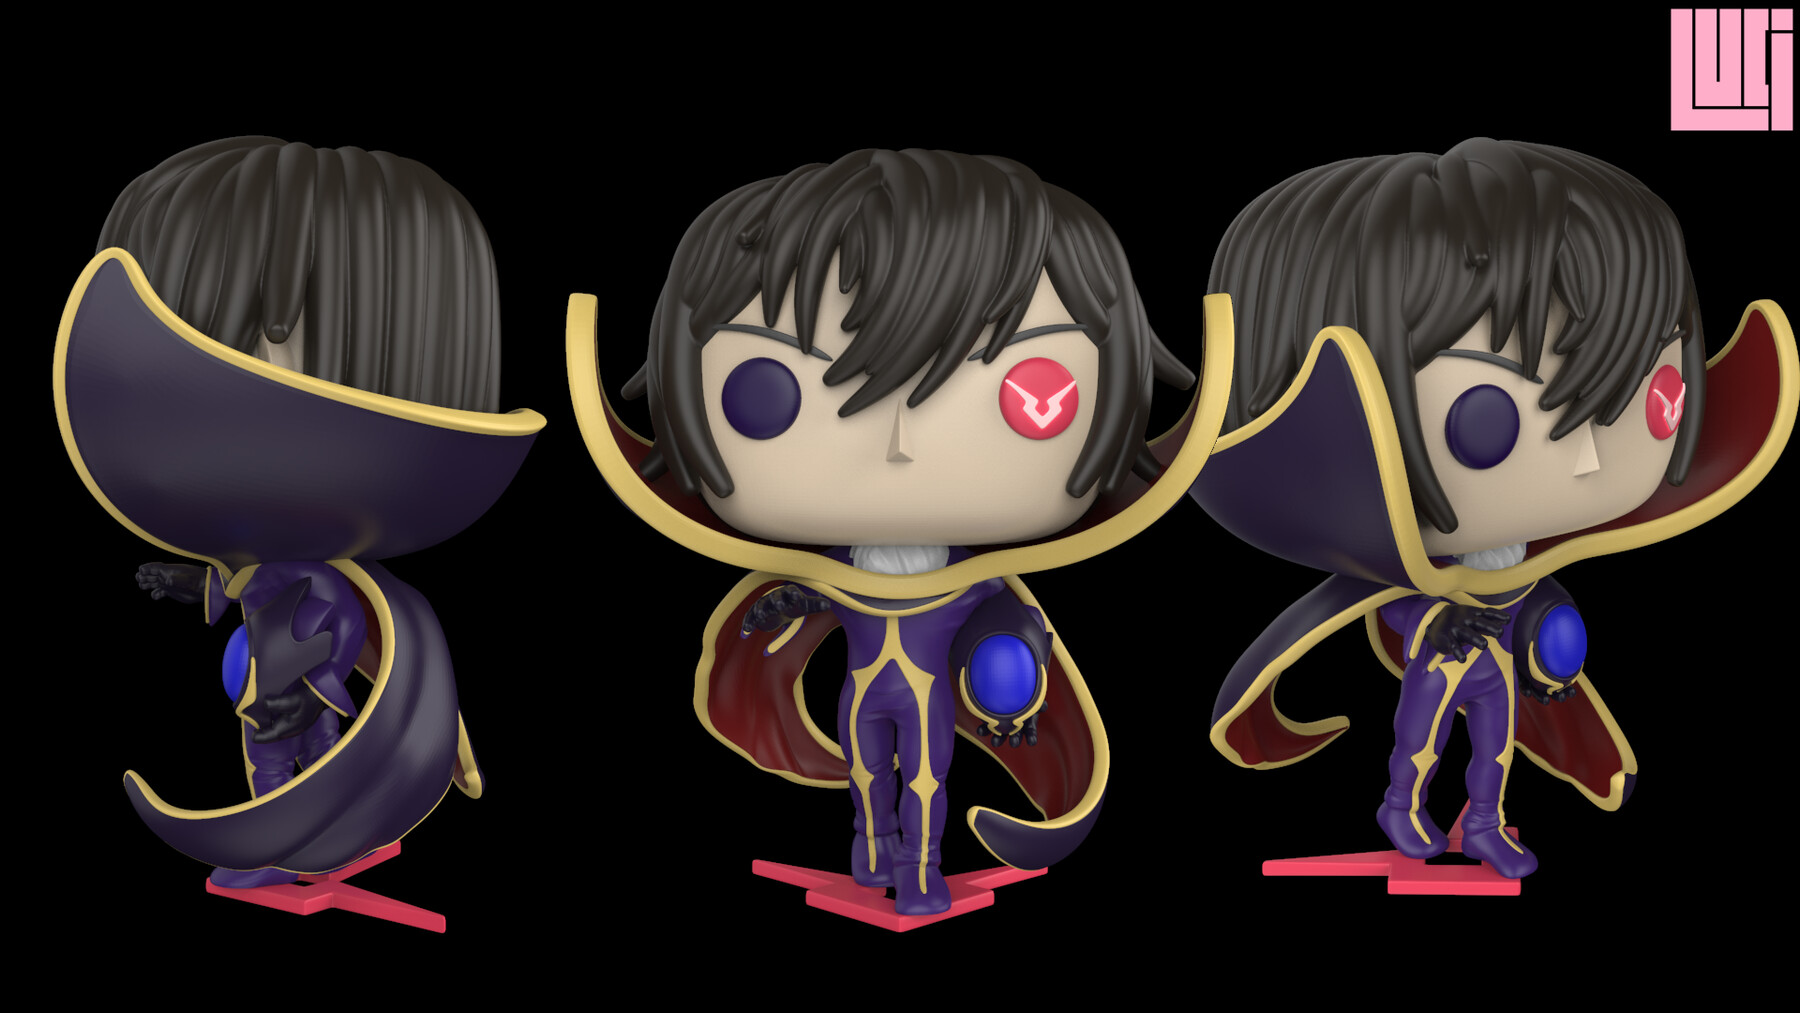 Lelouch and CC - Code Geass Anime Figurine for 3D printing 3D model 3D  printable